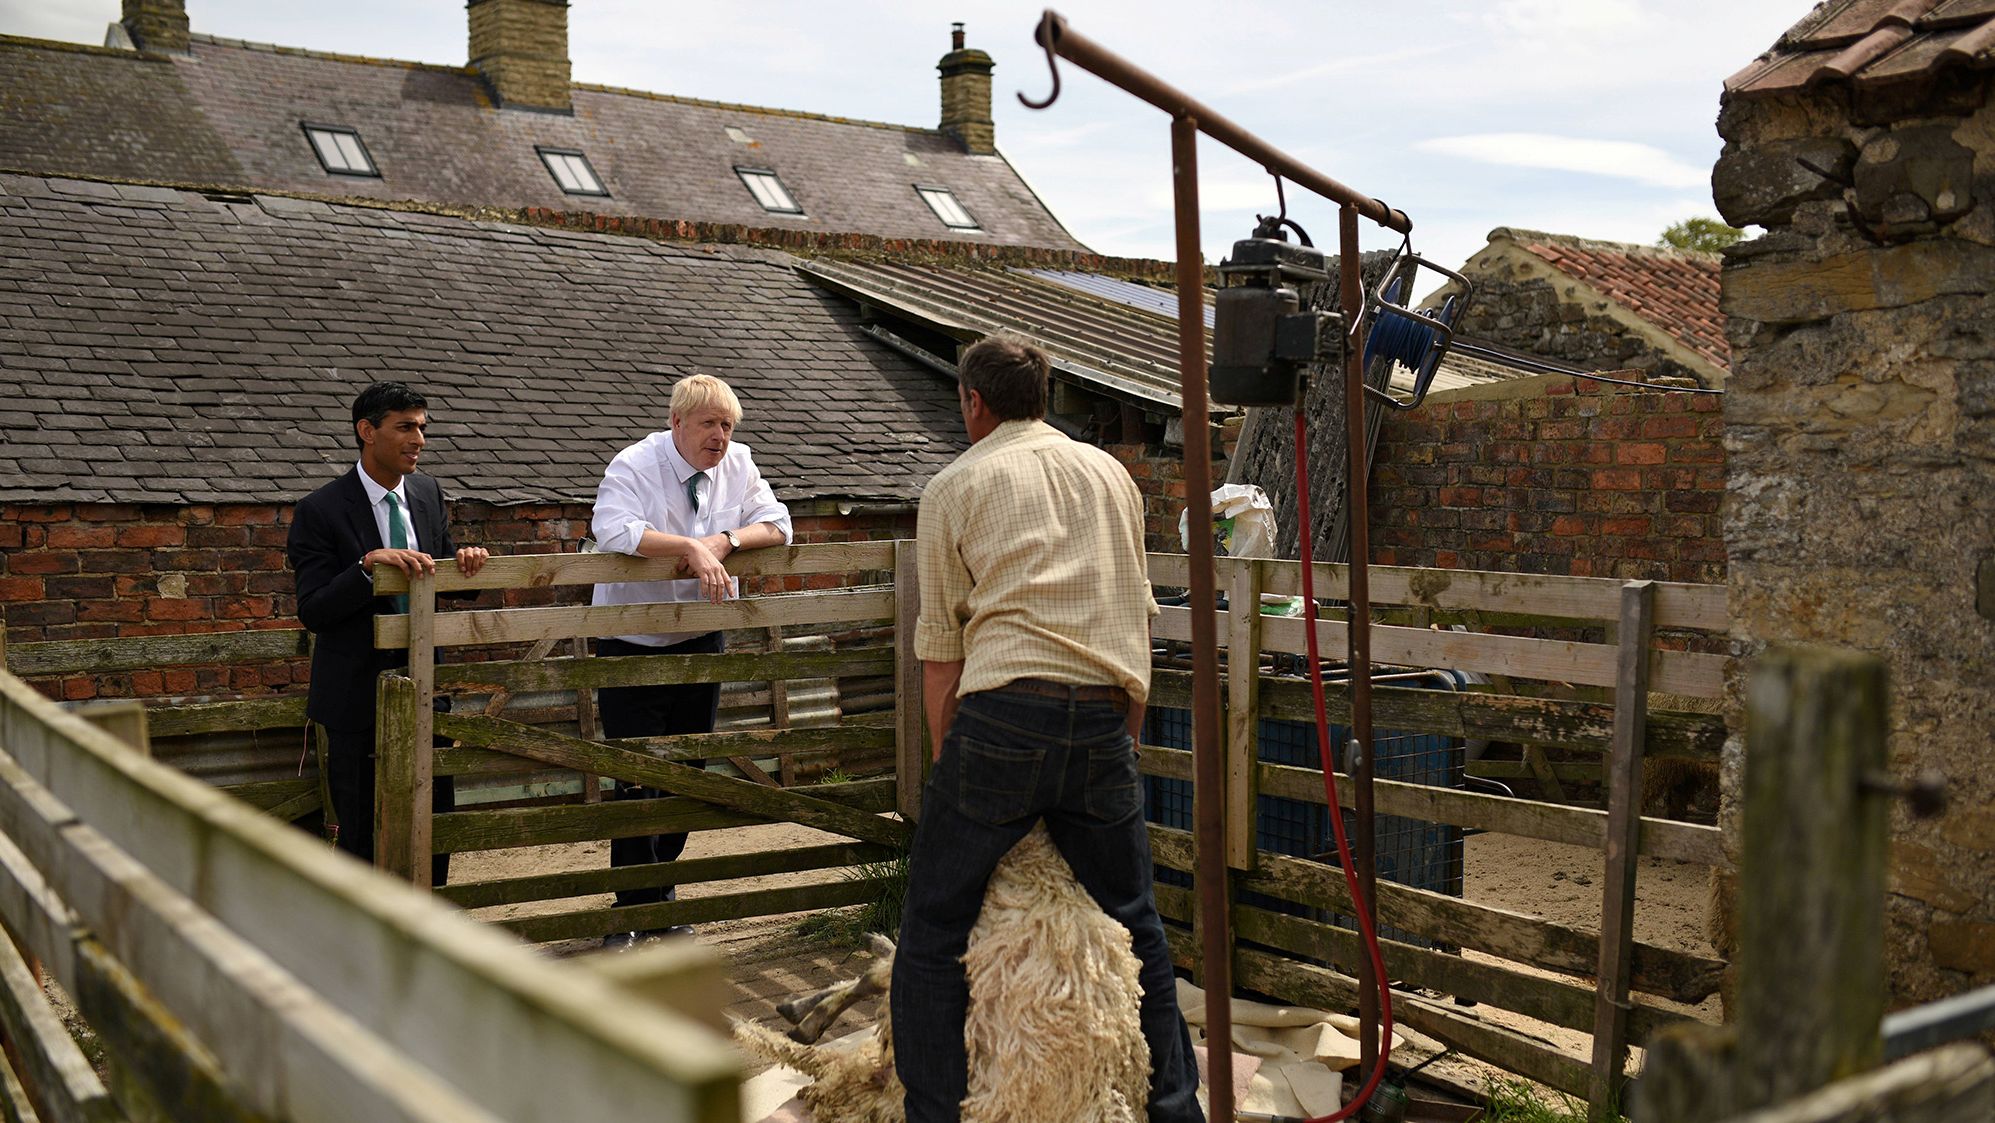 Sunak and Boris Johnson watch as a sheep is sheared during a visit to a farm in North Yorkshire, England, in July 2019. At the time Johnson was running to lead Britain's Conservative Party and Sunak was a member of Parliament.